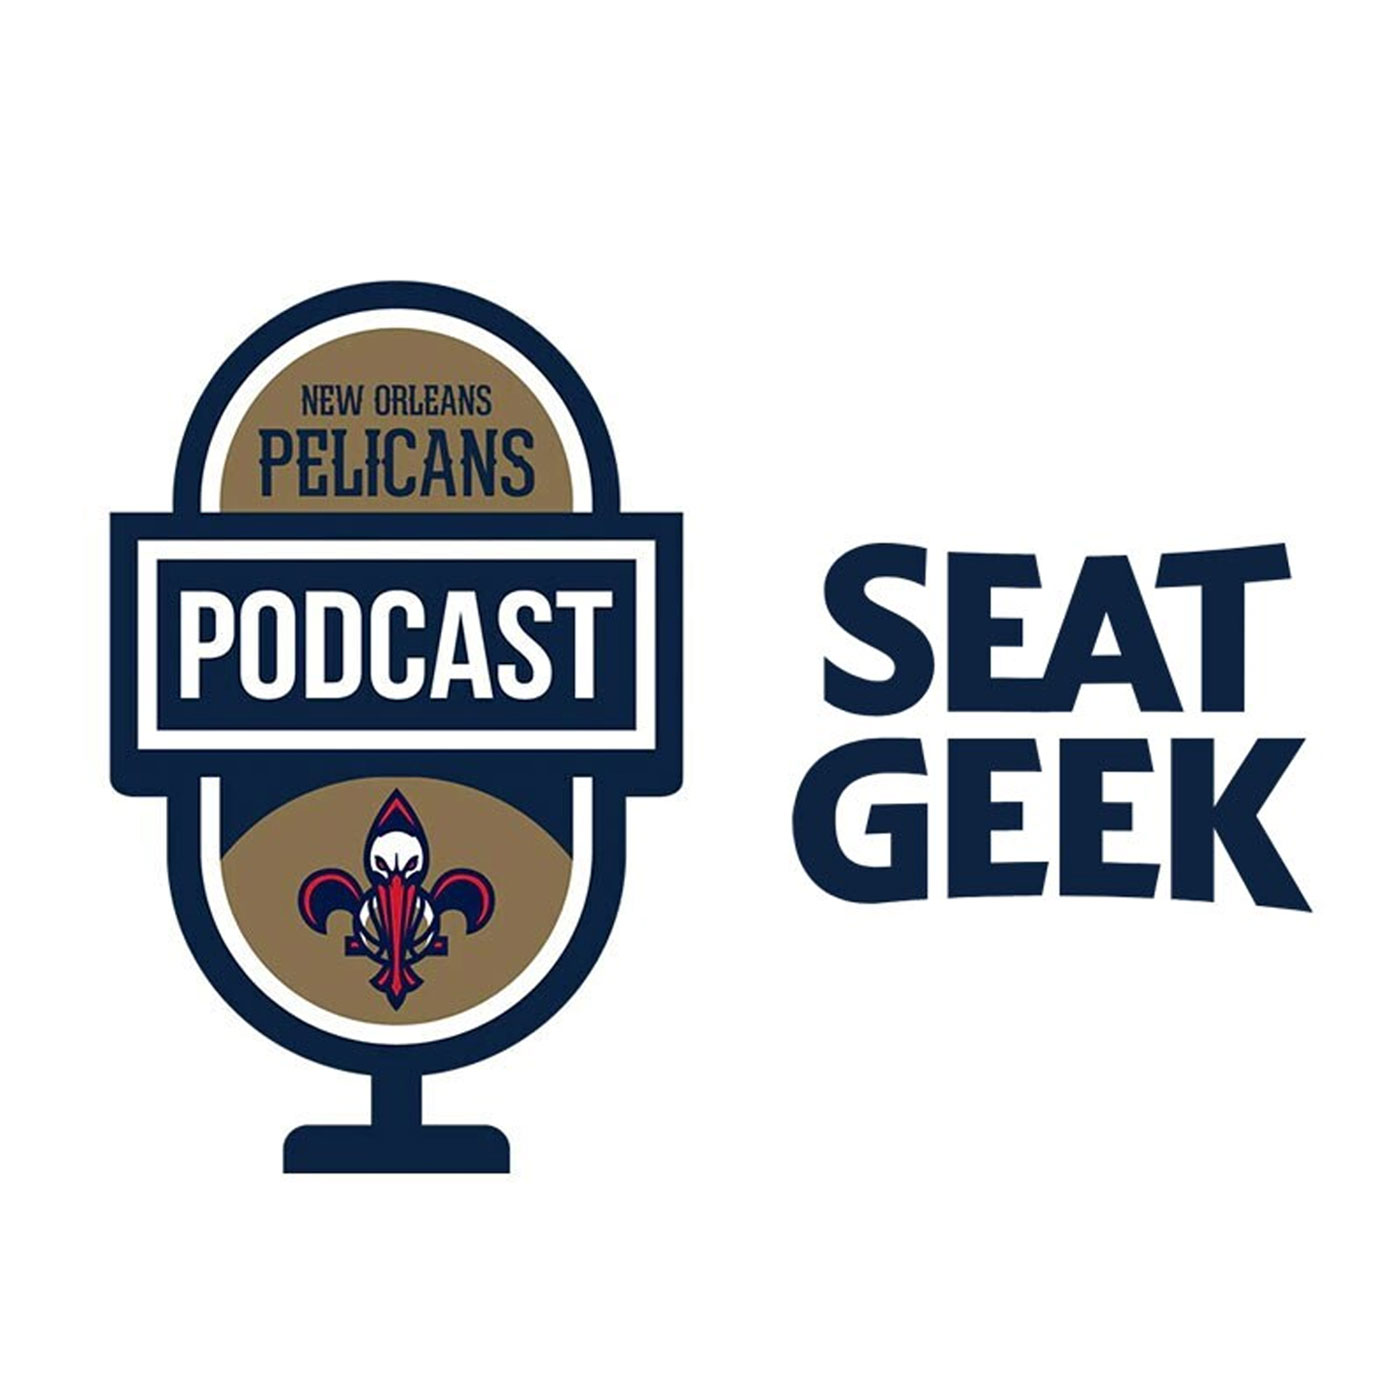 Zach Kram on the New Orleans Pelicans Podcast presented by SeatGeek - October 29, 2021